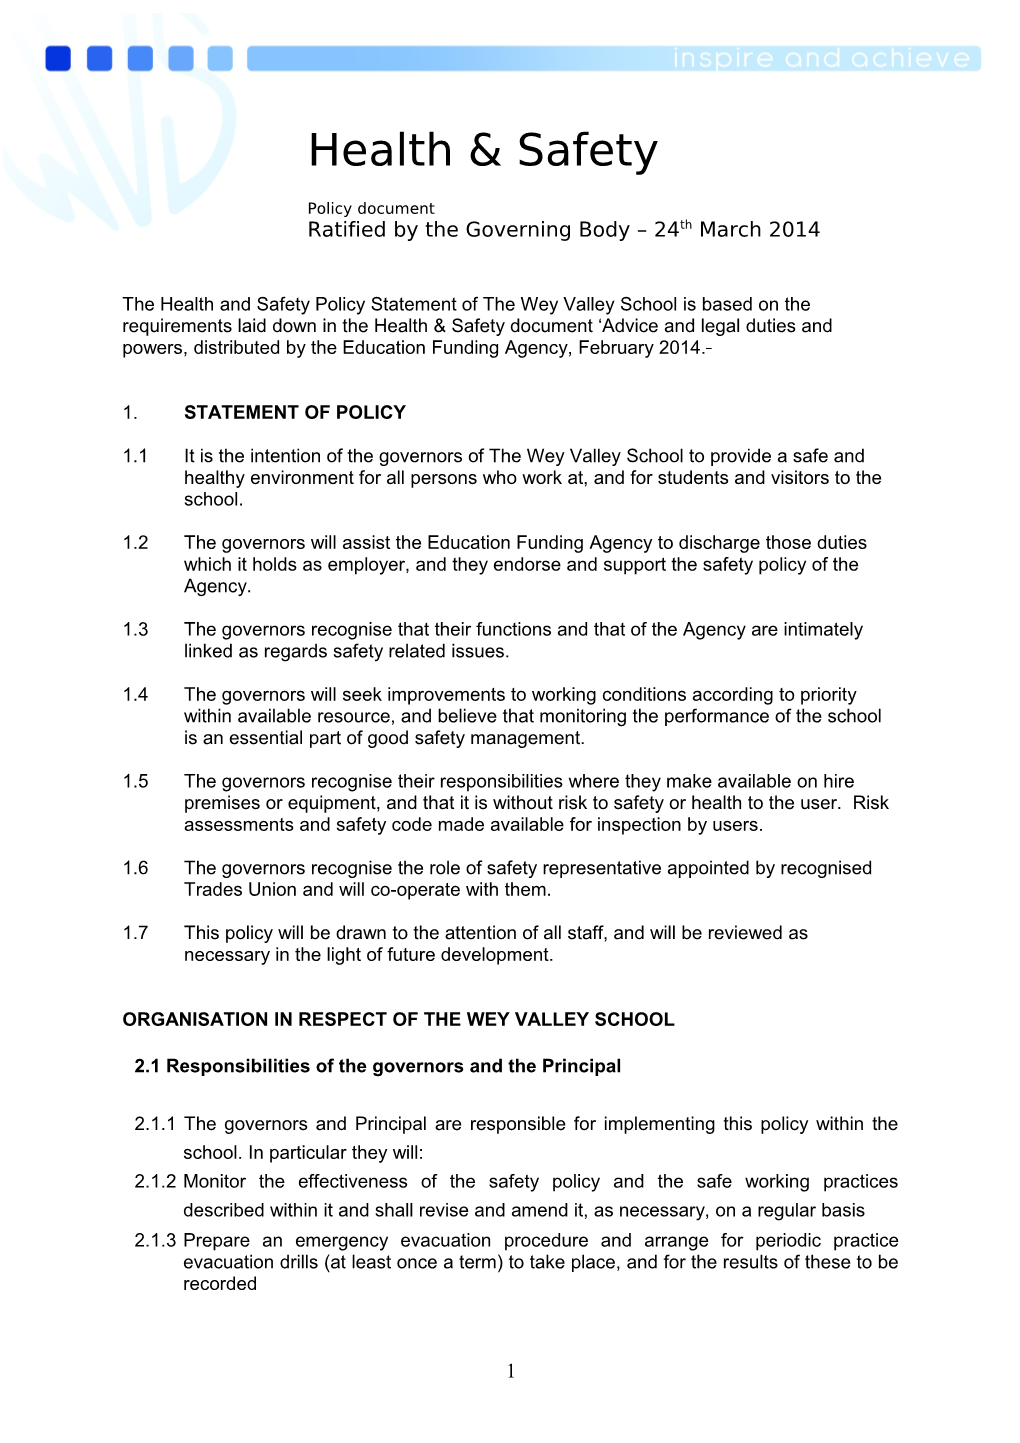 Ratified by the Governing Body 24Th March 2014